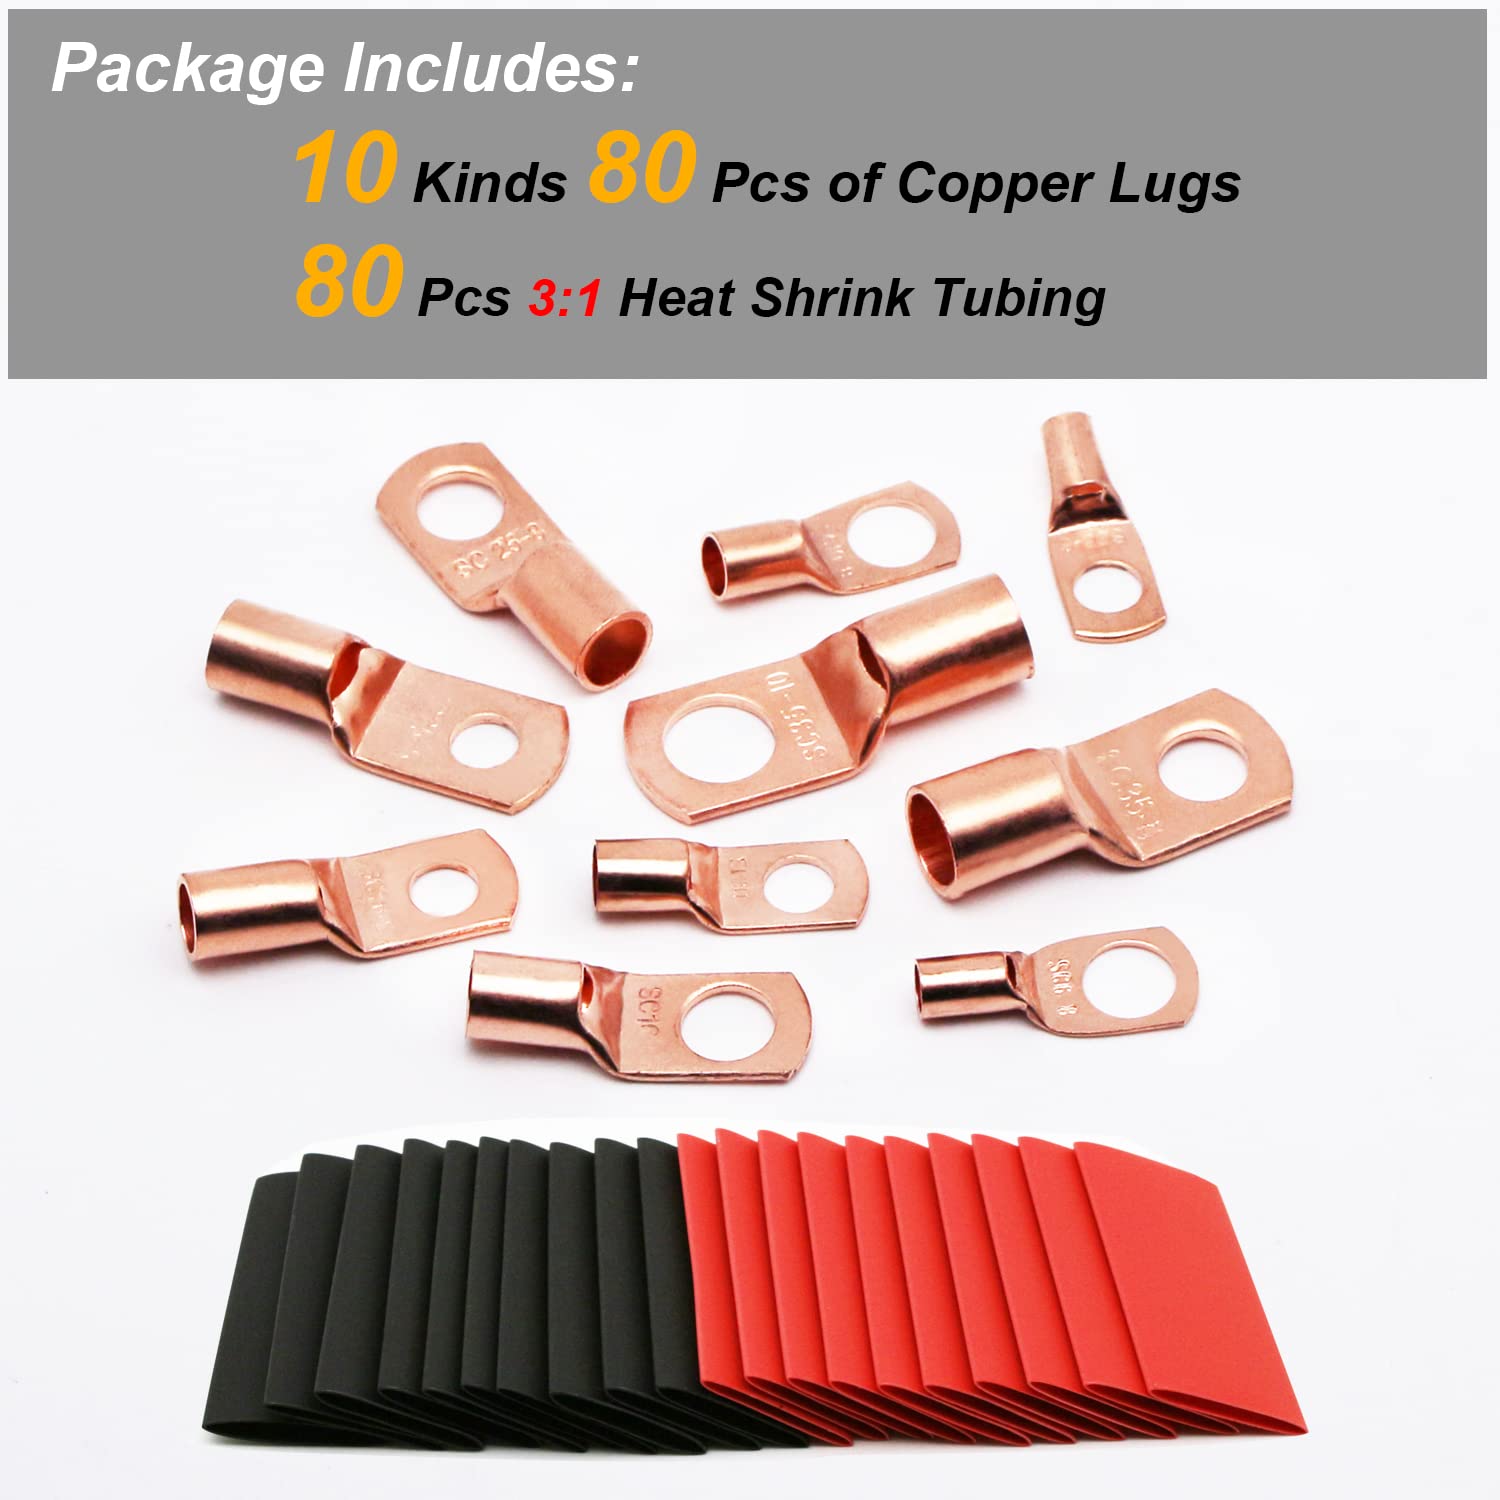 TKDMR 160Pcs Copper Wire Lugs AWG2 4 6 8 10 12 with Heat Shrink Set, 80Pcs Battery Cable Ends Ring Terminals Connectors Tubing Assortment Kit